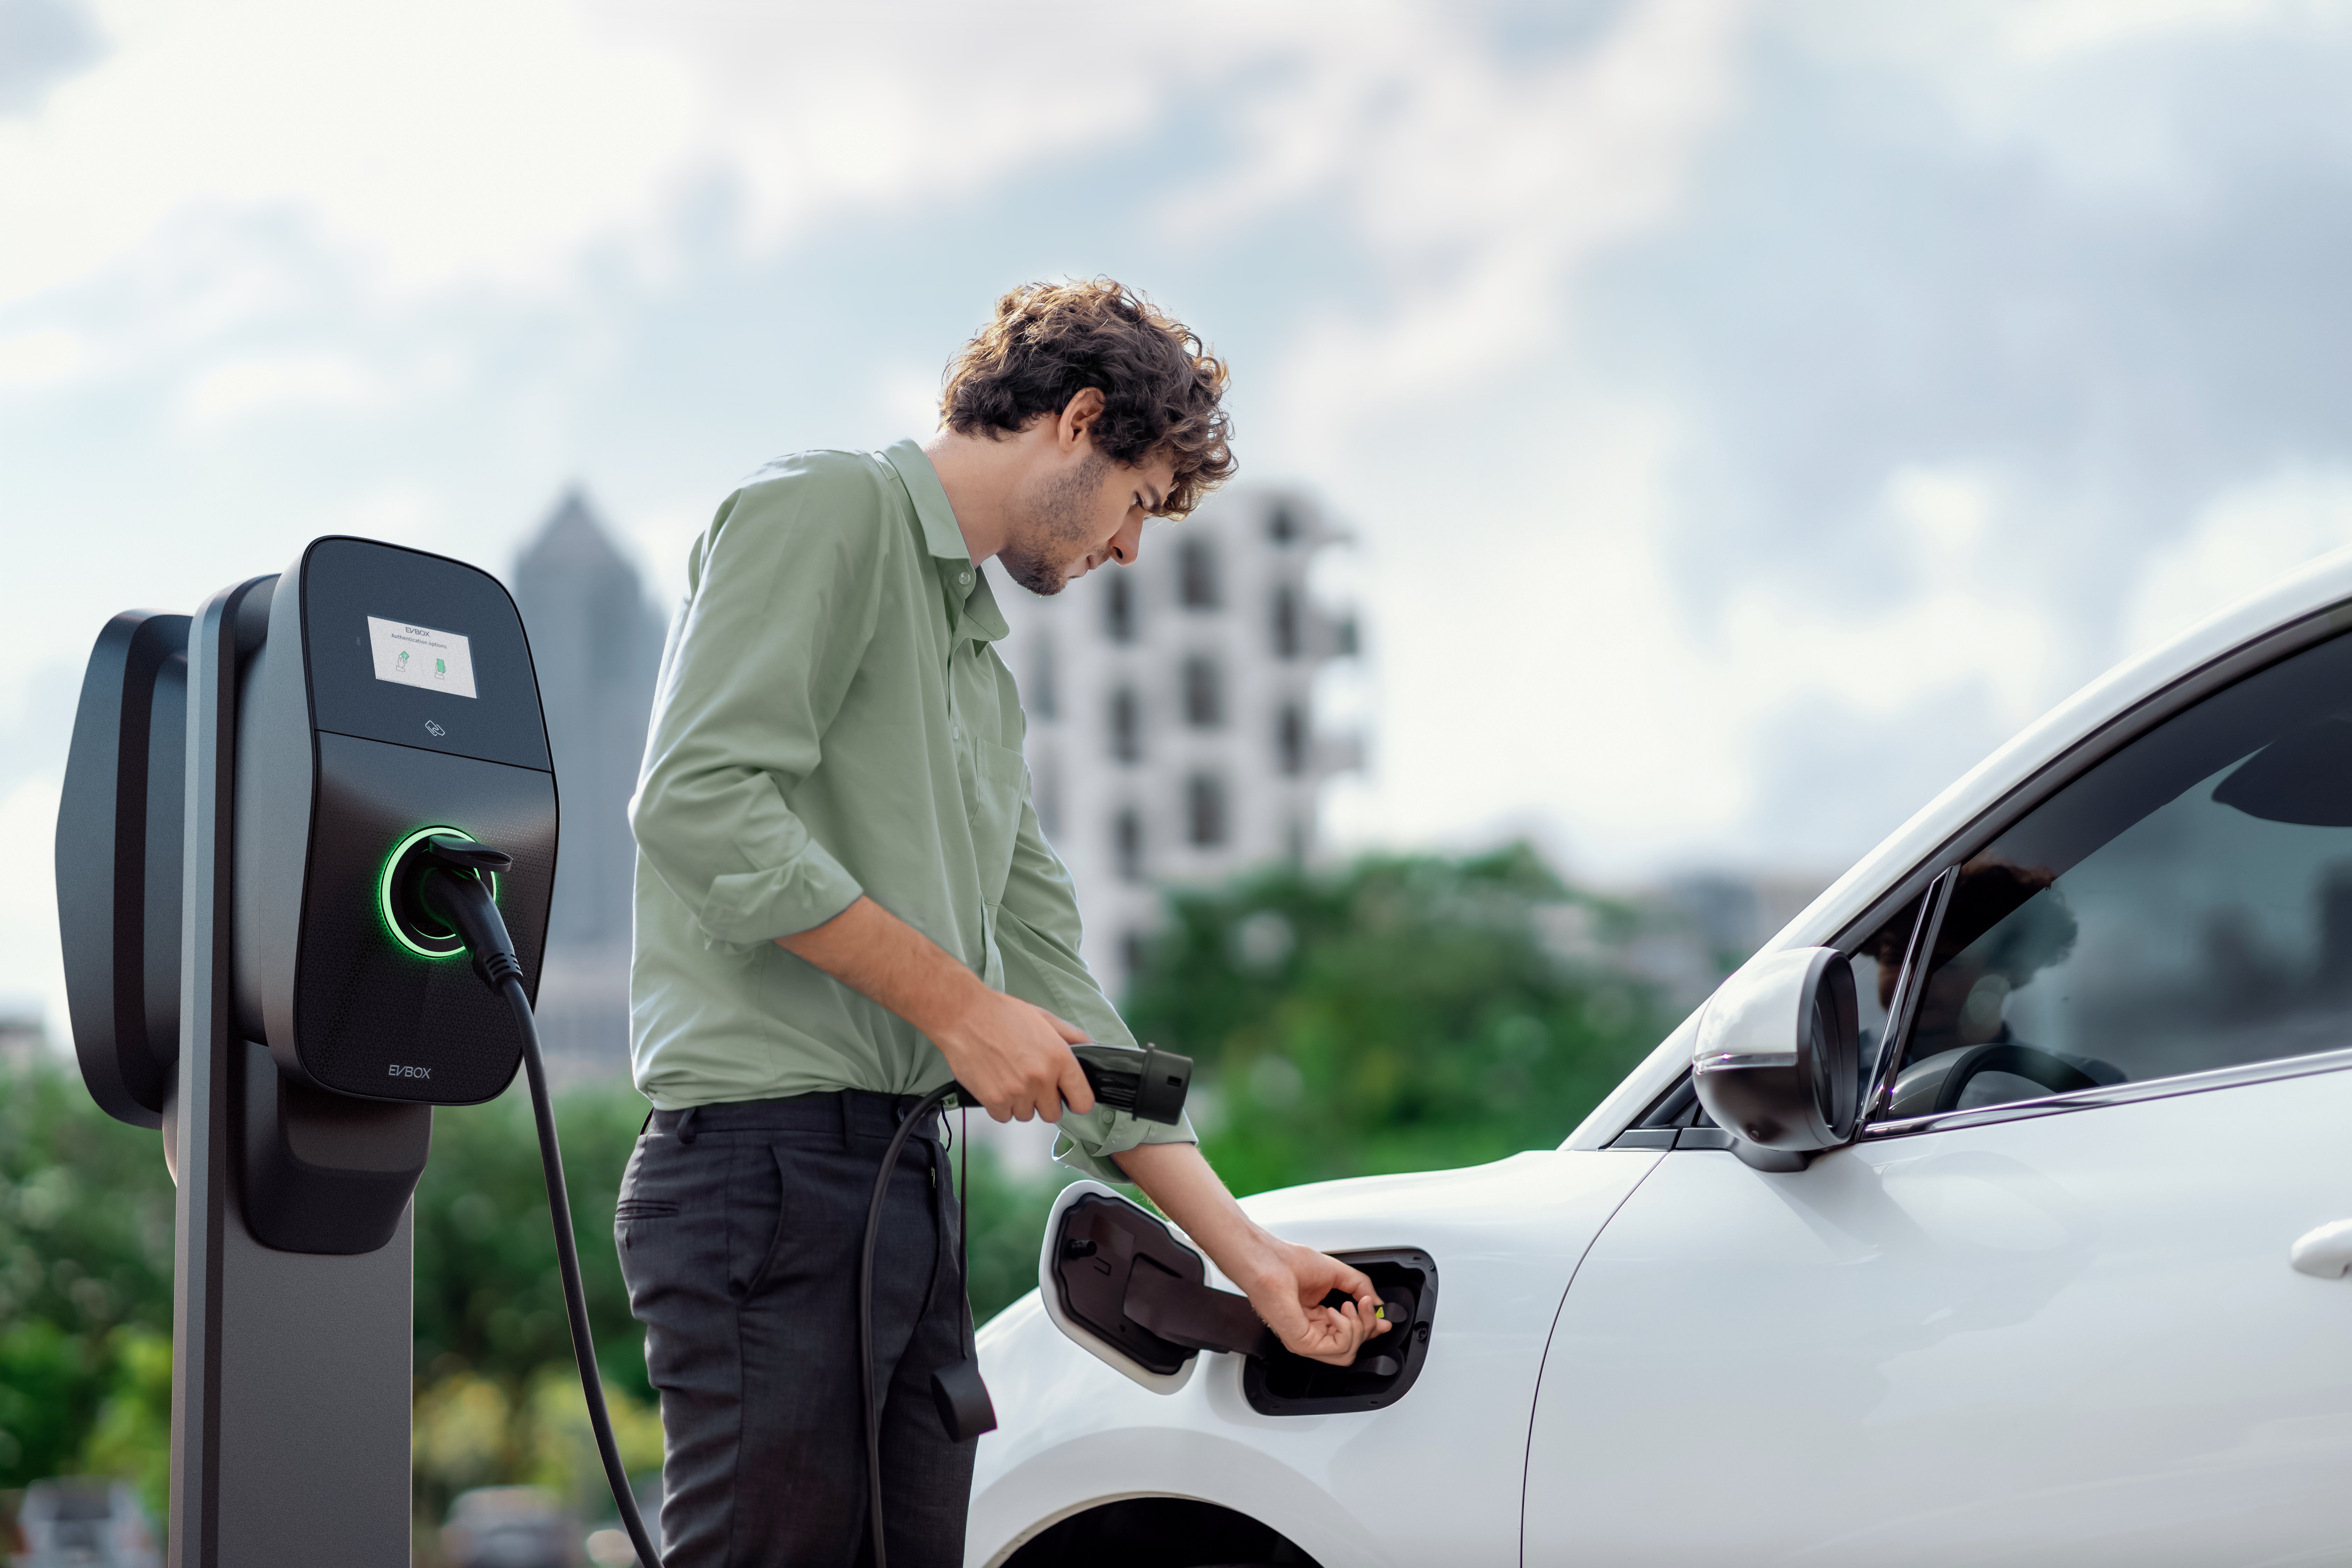 EV charging station business models for the workplace